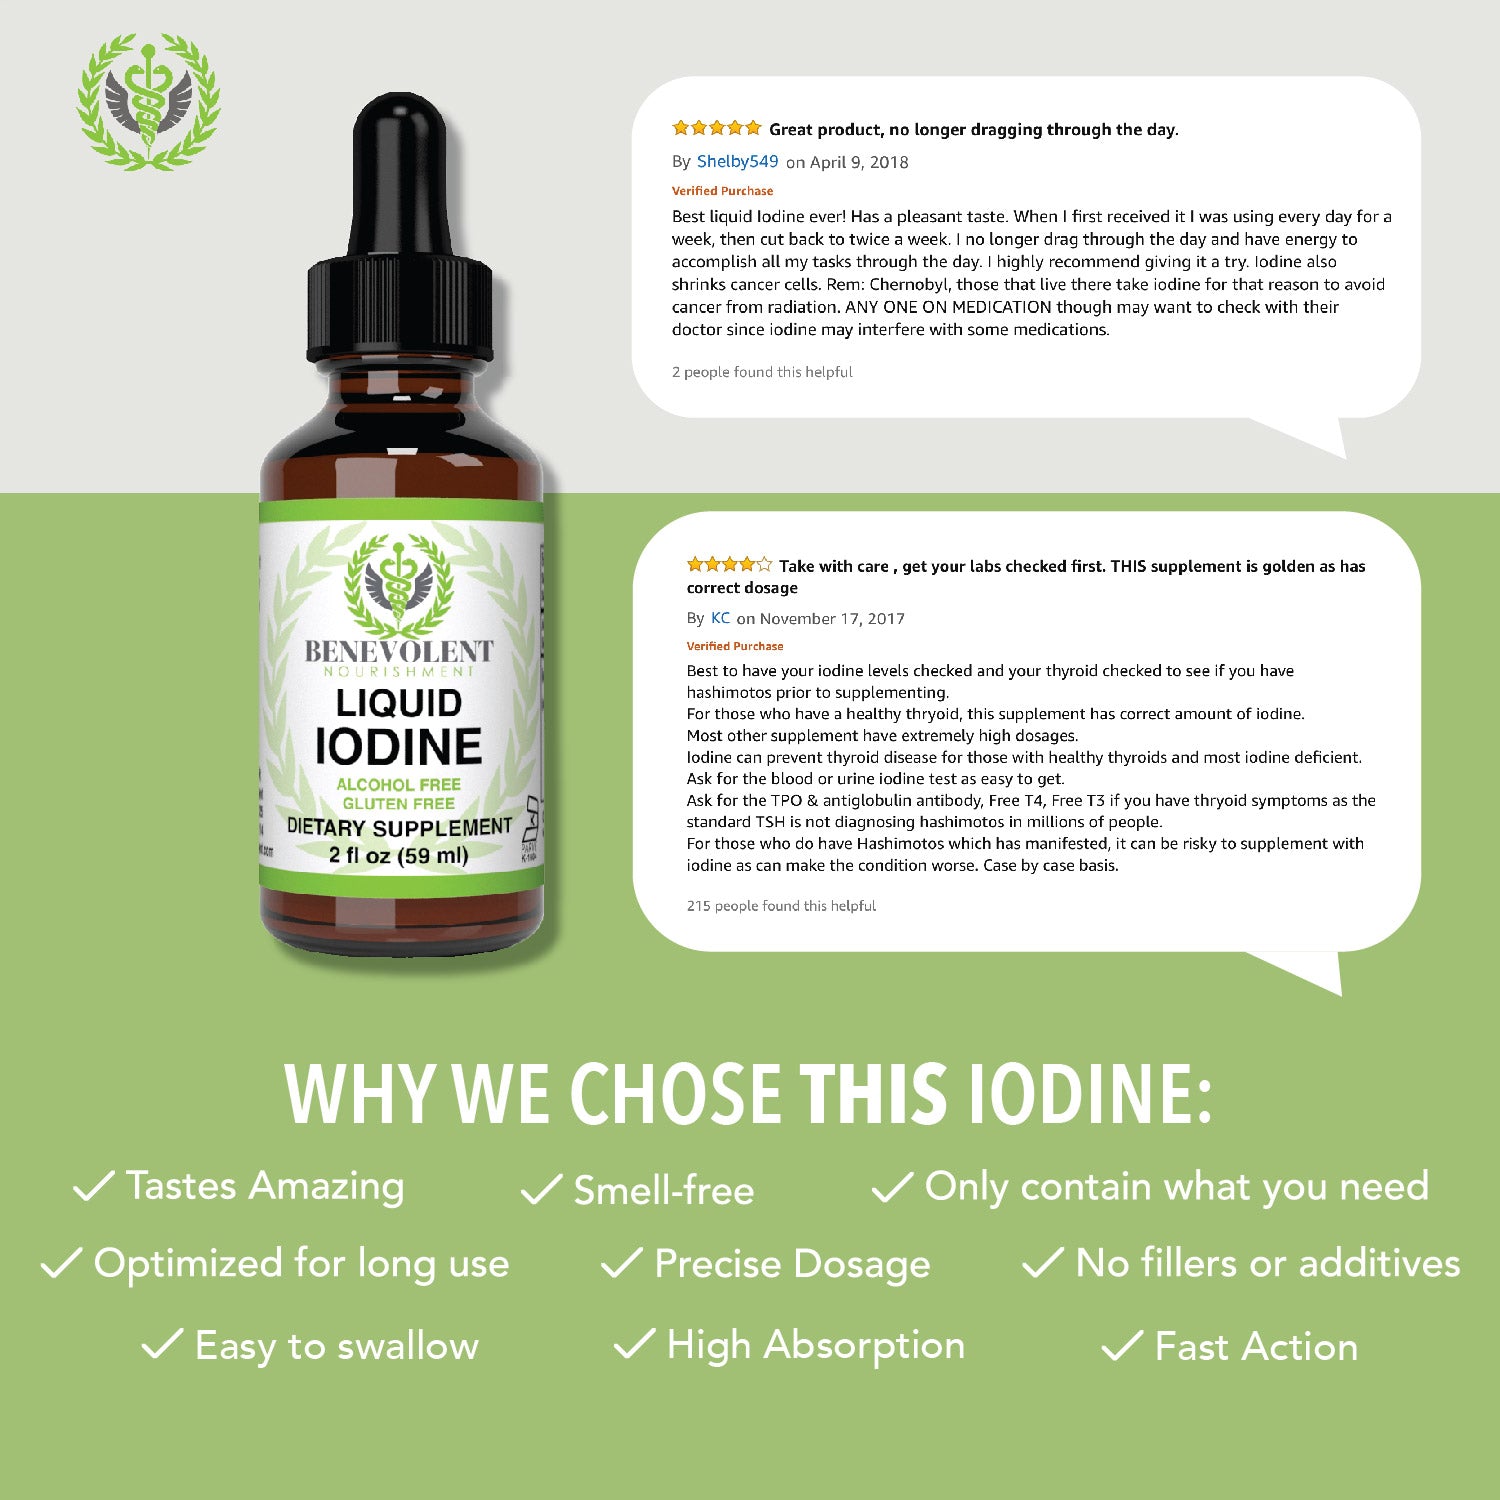 Why choose this iodine